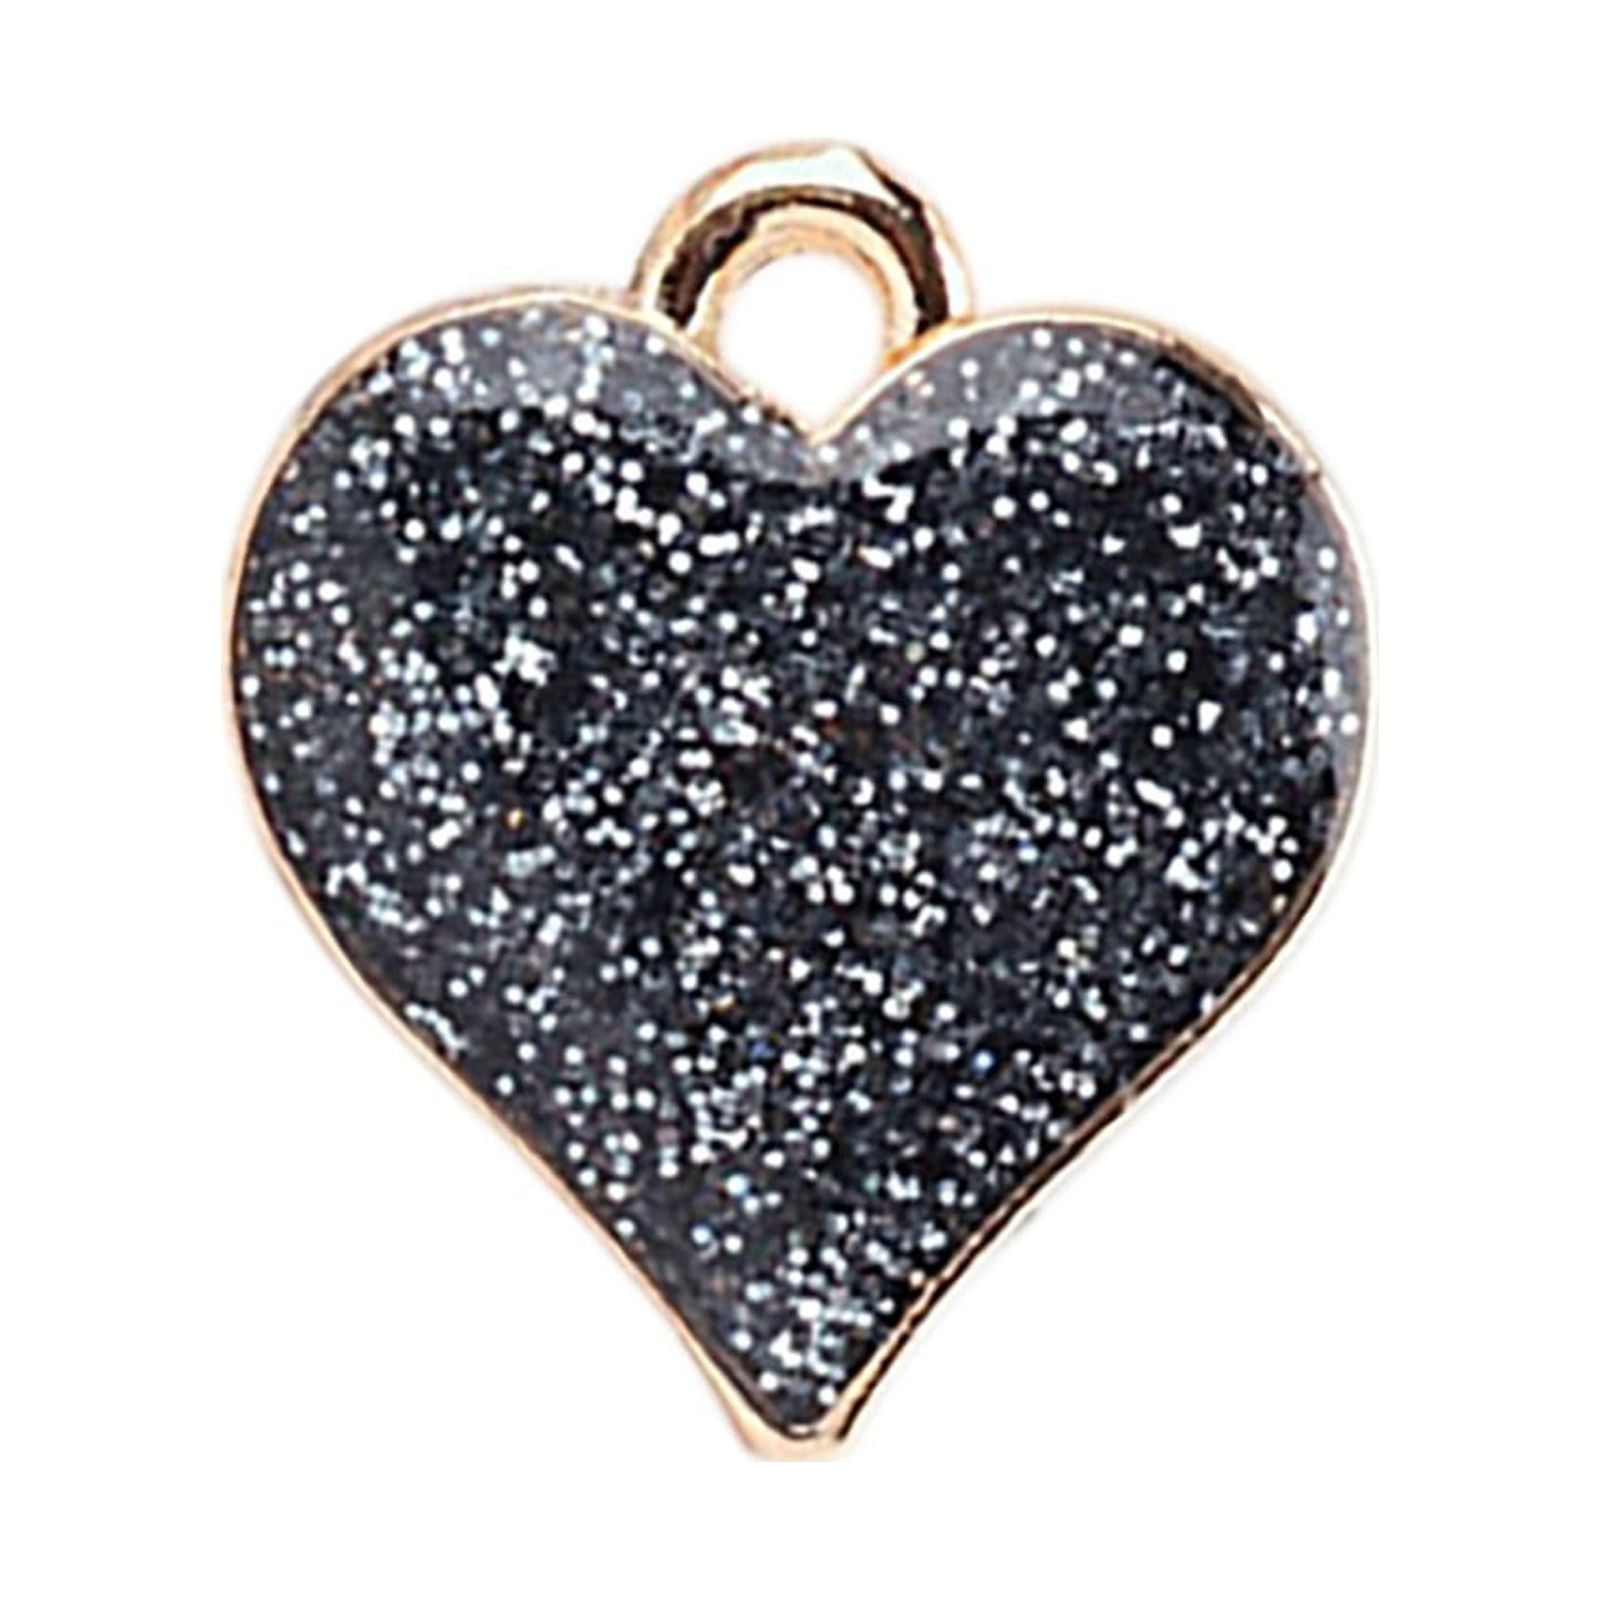 Daznico Heart Shape Charms Bling Charms for Jewelry Making Valentine's Day DIY Earring Bracelet Necklace, Adult Unisex, Size: One size, Black